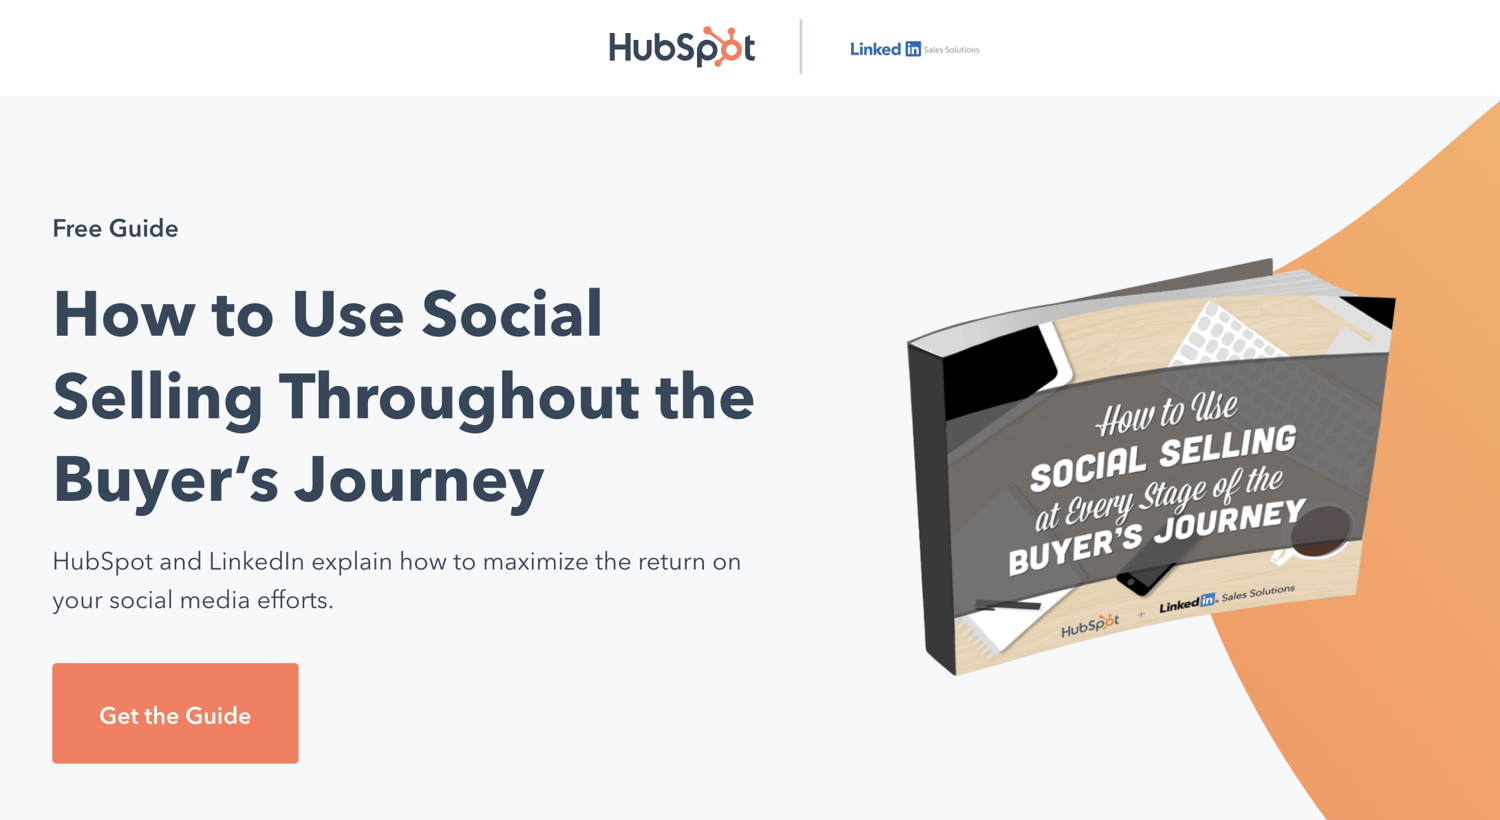 co-marketing example of an ebook by hubspot and linkedin